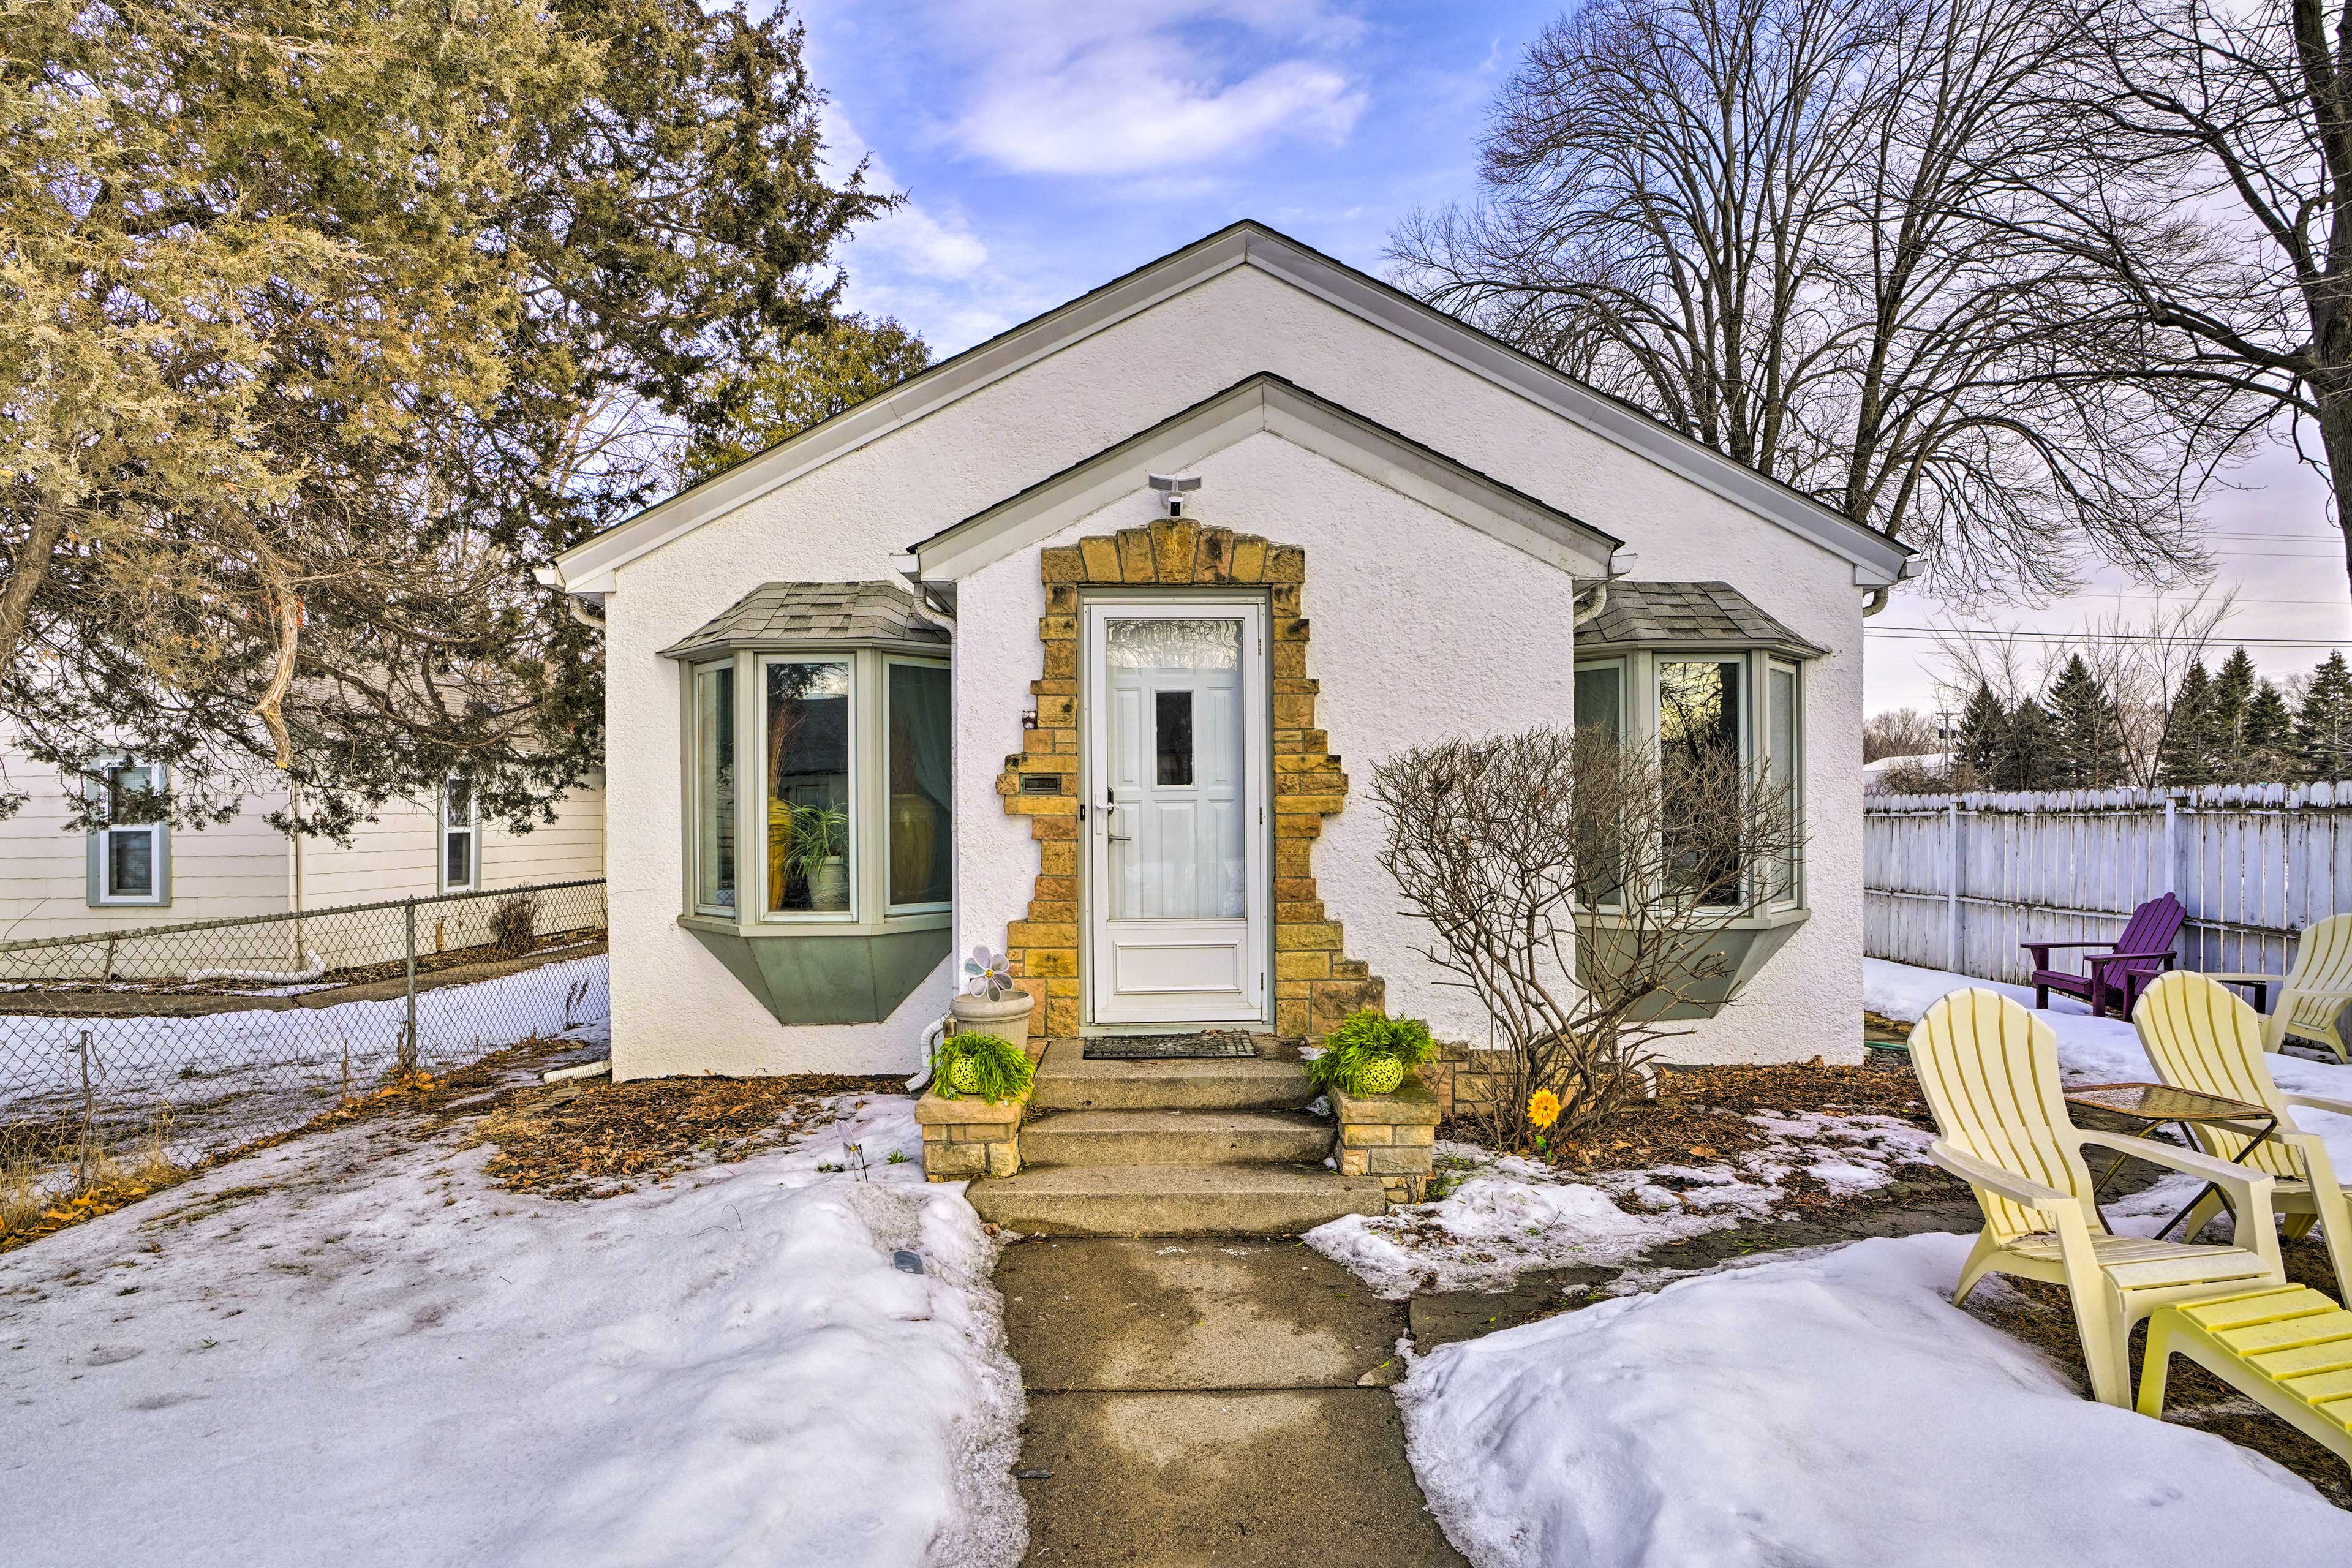 Minneapolis Vacation Rental | 2BR | 1BA | 1,100 Sq Ft | 3 Steps Required